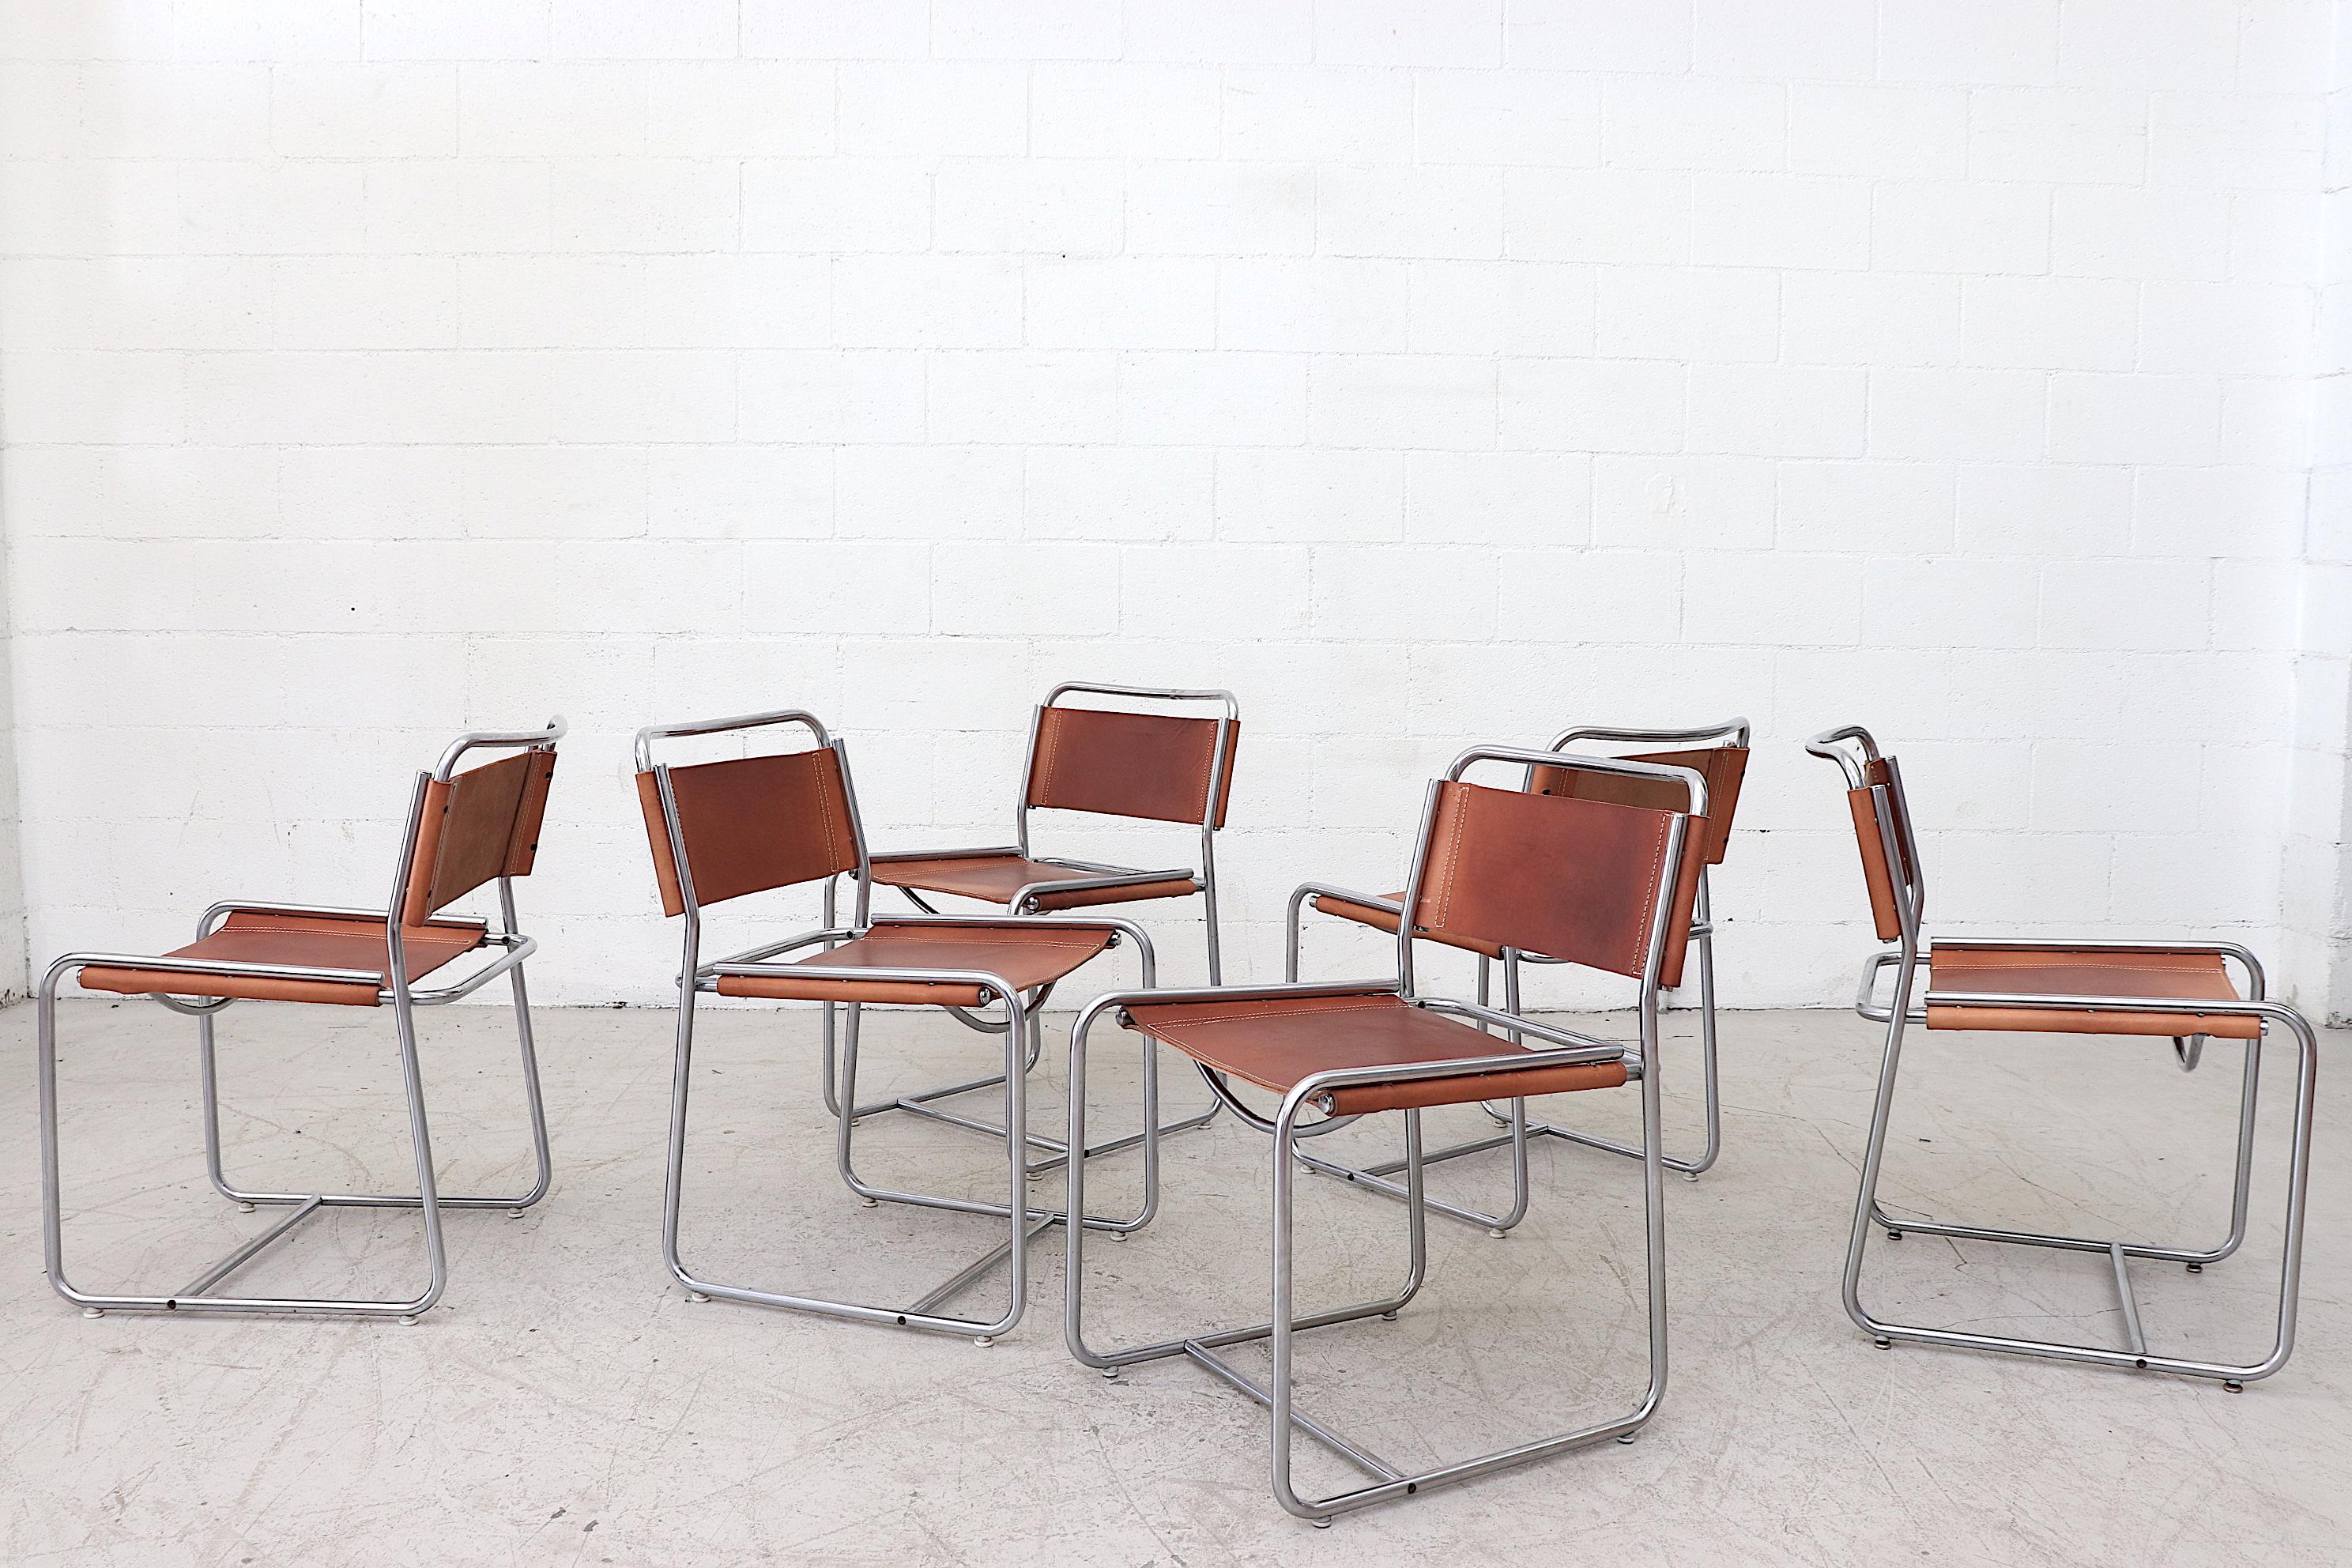 Rare set of 6 Claire Bataille and Paul Ibens Model SE18 leather dining chairs for 'T spectrum, Netherlands, 1971. Nickel-plated tubular steel frames with newly made period correct saddle leather seating including white cotton stitching. Simple but